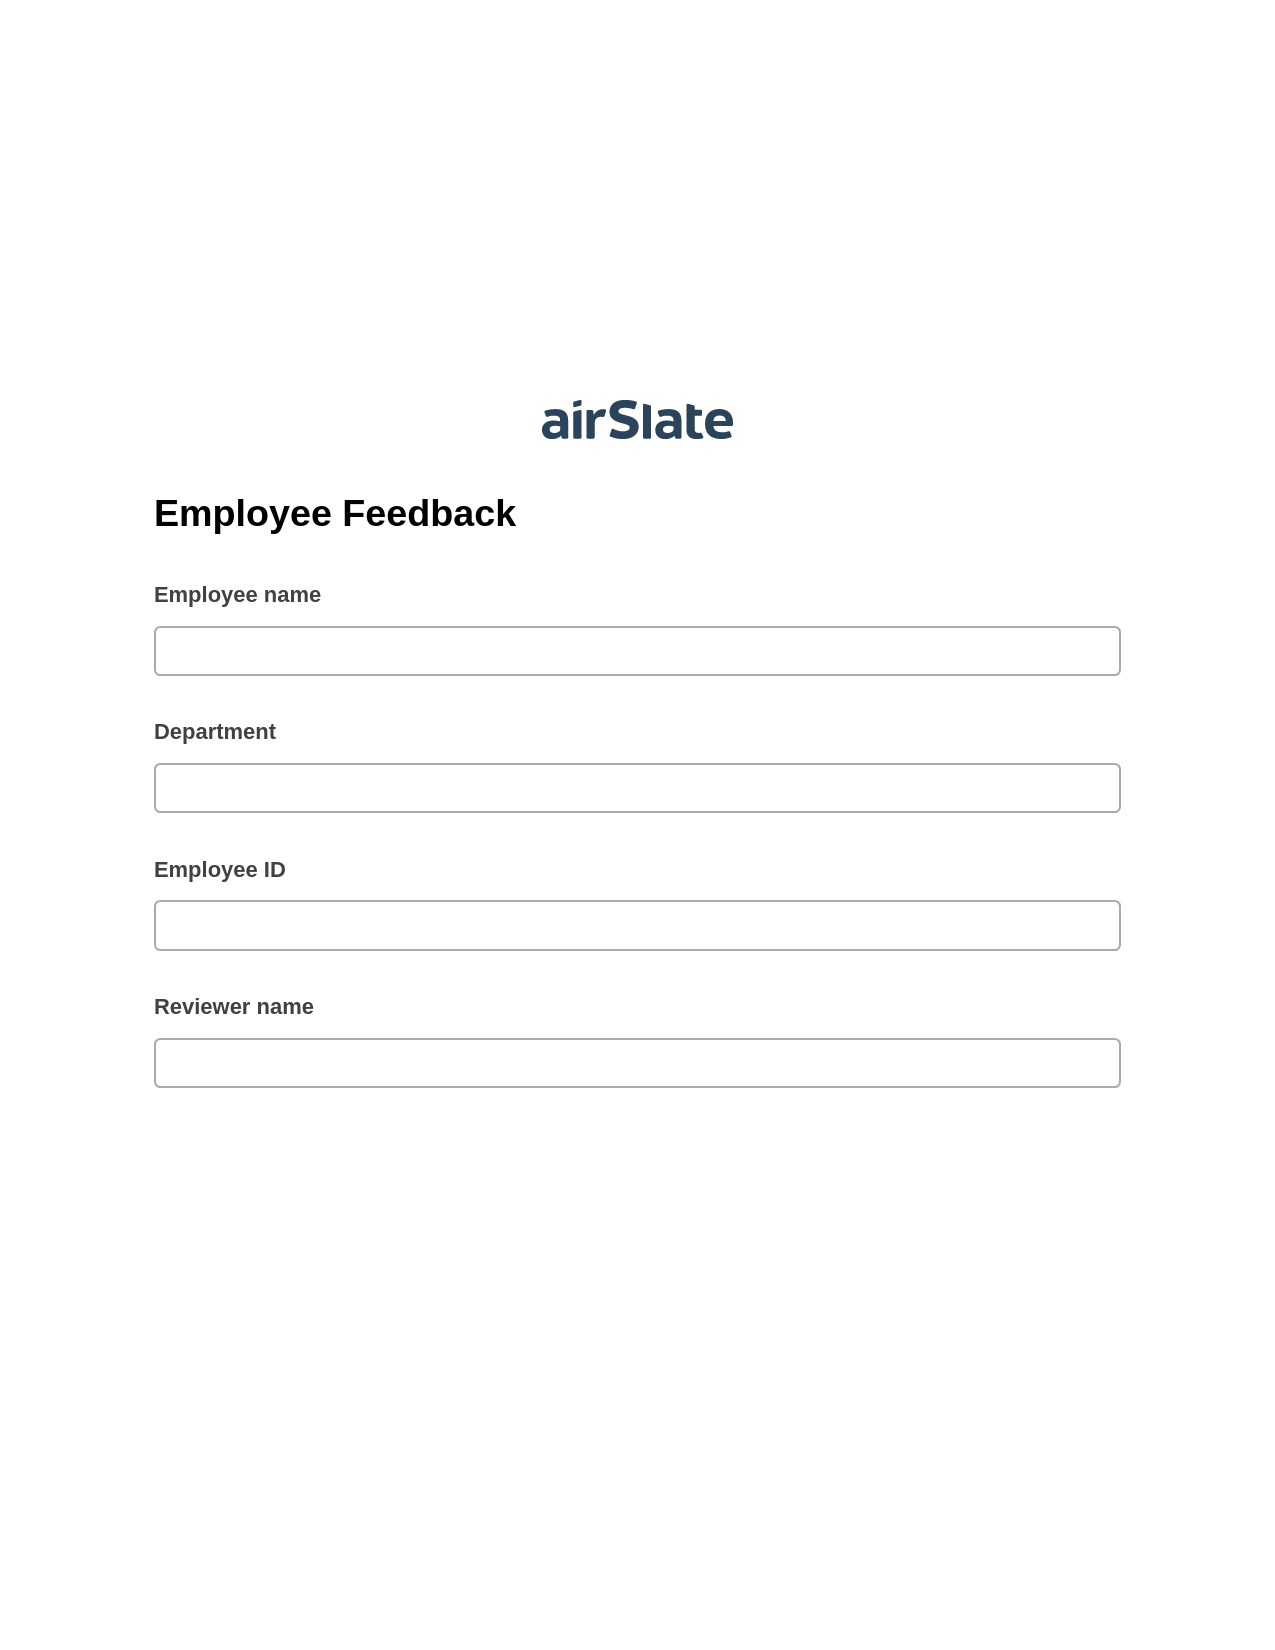 Multirole Employee Feedback Pre-fill from Salesforce Record Bot, In-person Signing Bot, Slack Notification Postfinish Bot